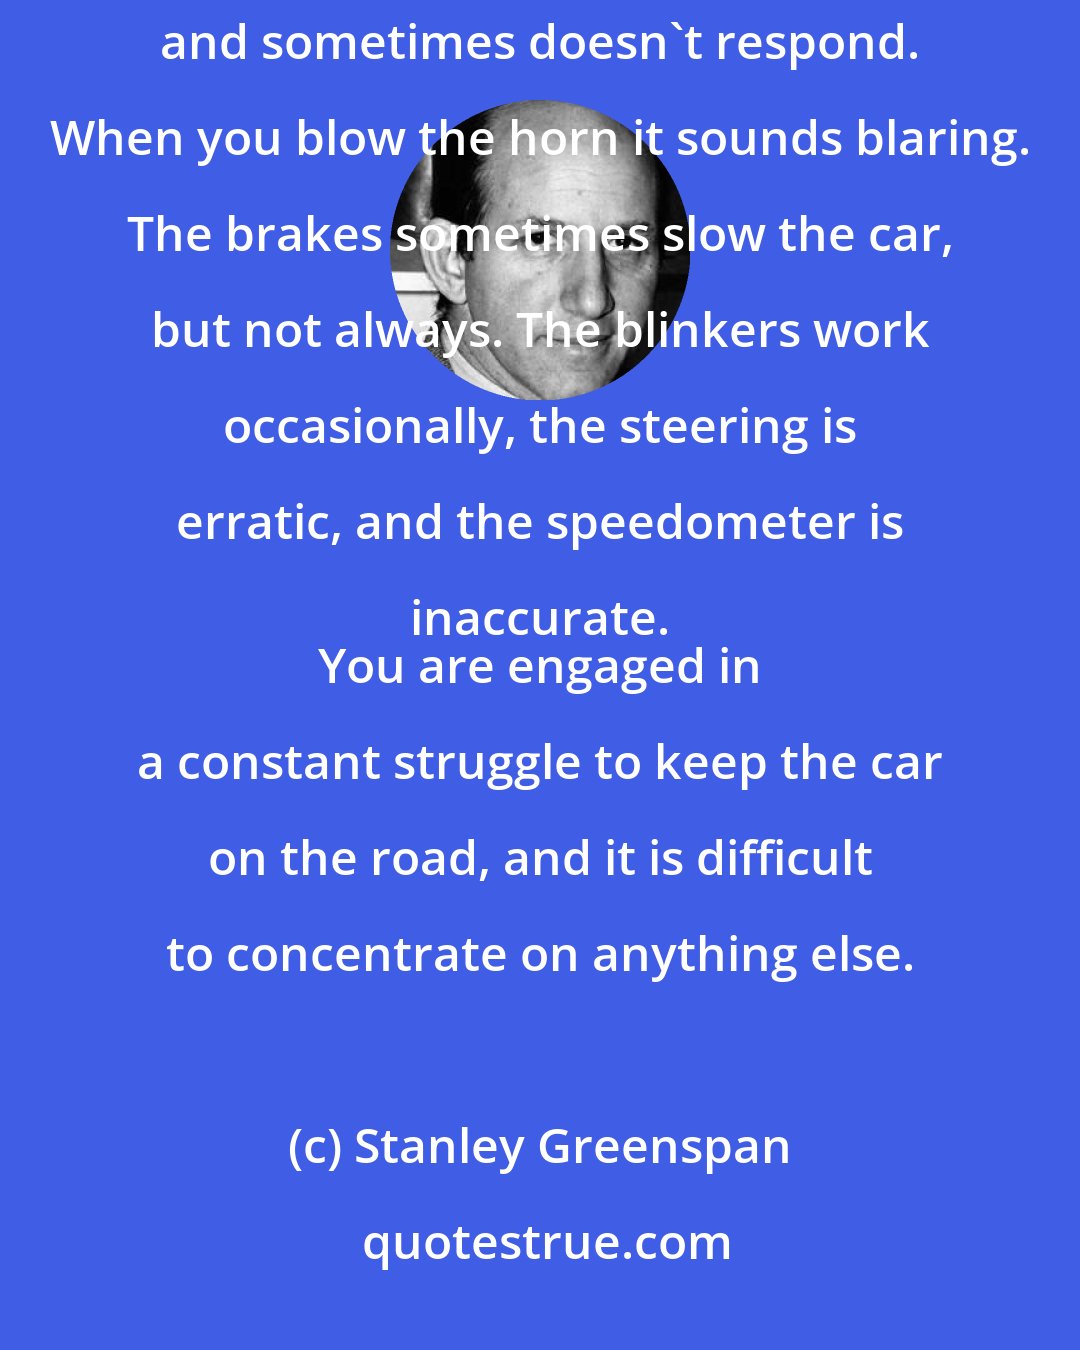 Stanley Greenspan: Imagine driving a car that isn't working well. When you step on the gas the car sometimes lurches forward and sometimes doesn't respond. When you blow the horn it sounds blaring. The brakes sometimes slow the car, but not always. The blinkers work occasionally, the steering is erratic, and the speedometer is inaccurate. 
 You are engaged in a constant struggle to keep the car on the road, and it is difficult to concentrate on anything else.